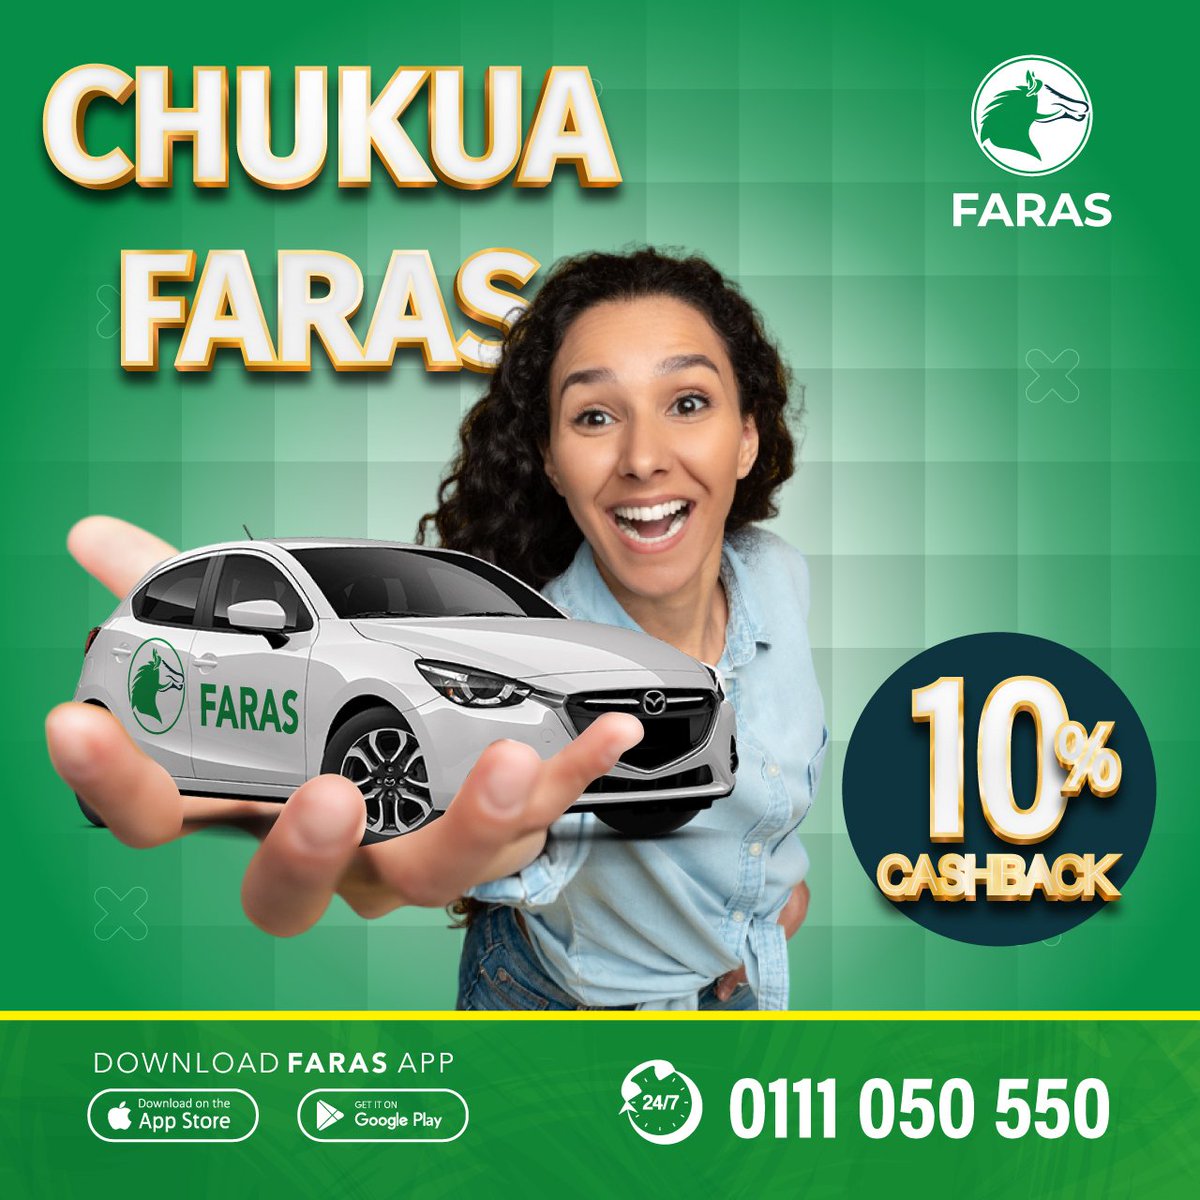 Faras Kenya taxi has spacious cars that to accommodate more travelers @farasKenya . You can experience the convenience of choosing from our diverse fleet to suit your specific needs. Travel comfortably and confidently with us. #CommuteWithFaras.